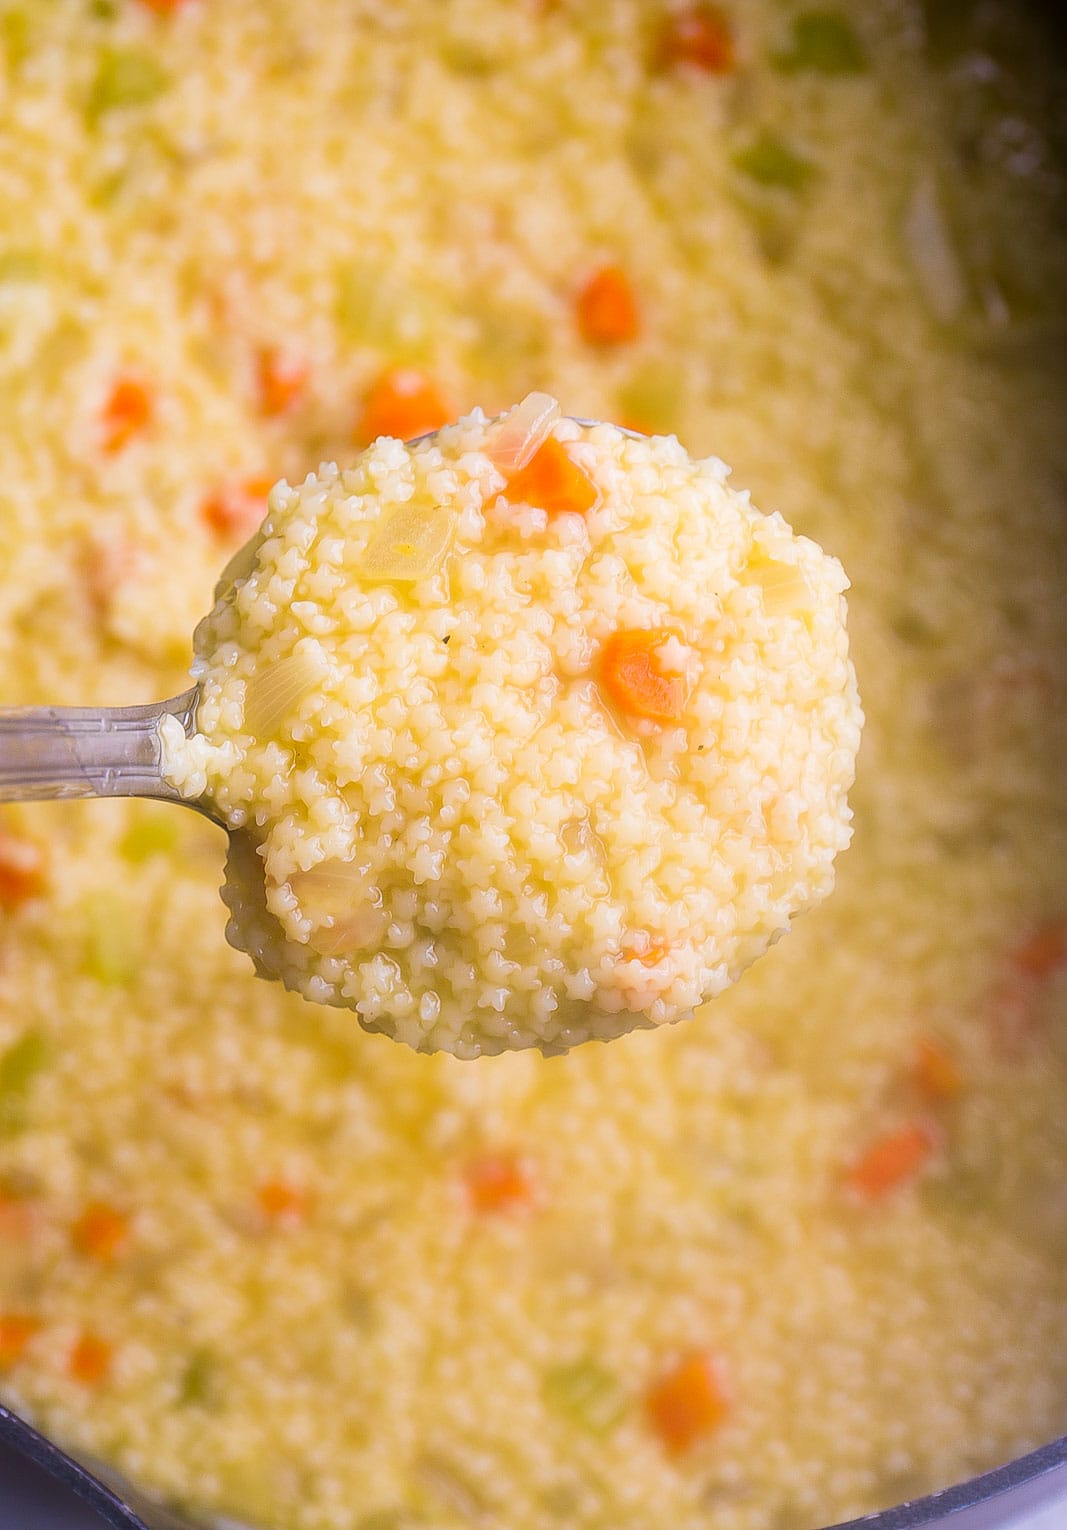 Spoonful of pastina soup.